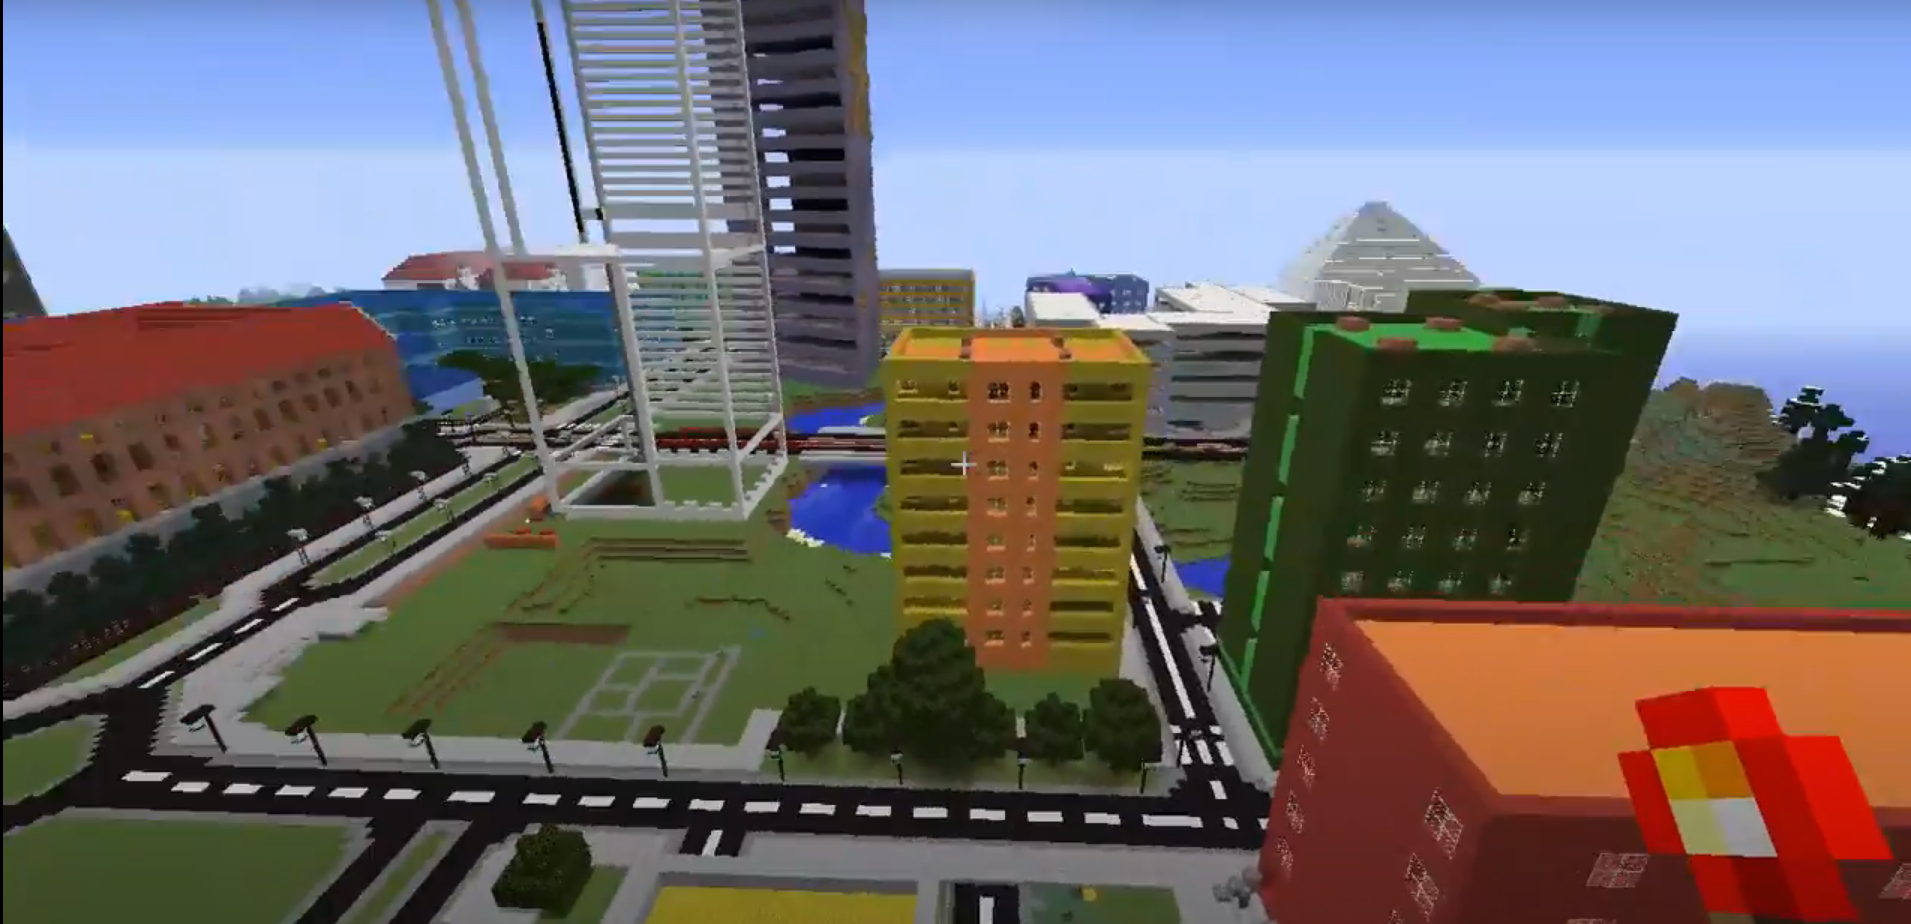 colorful tower blocks WIP minecraft city